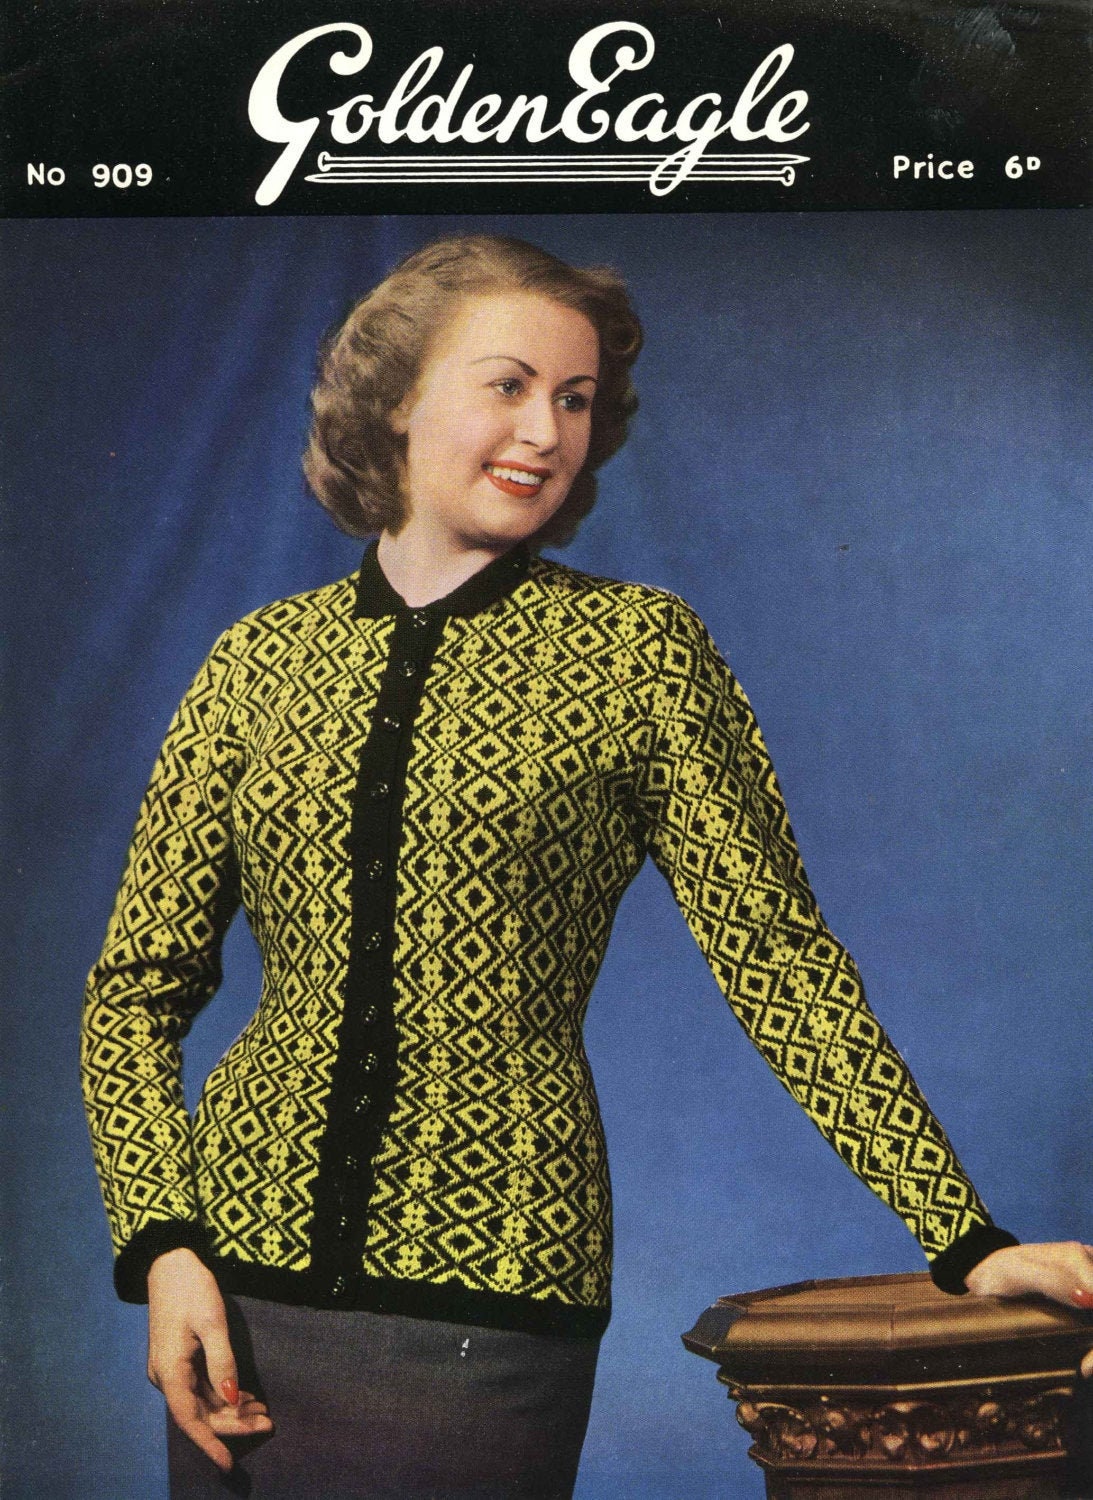 Ladies Cardigan, 35" Bust, 3ply, 50s Knitting Pattern, Golden Eagle 909